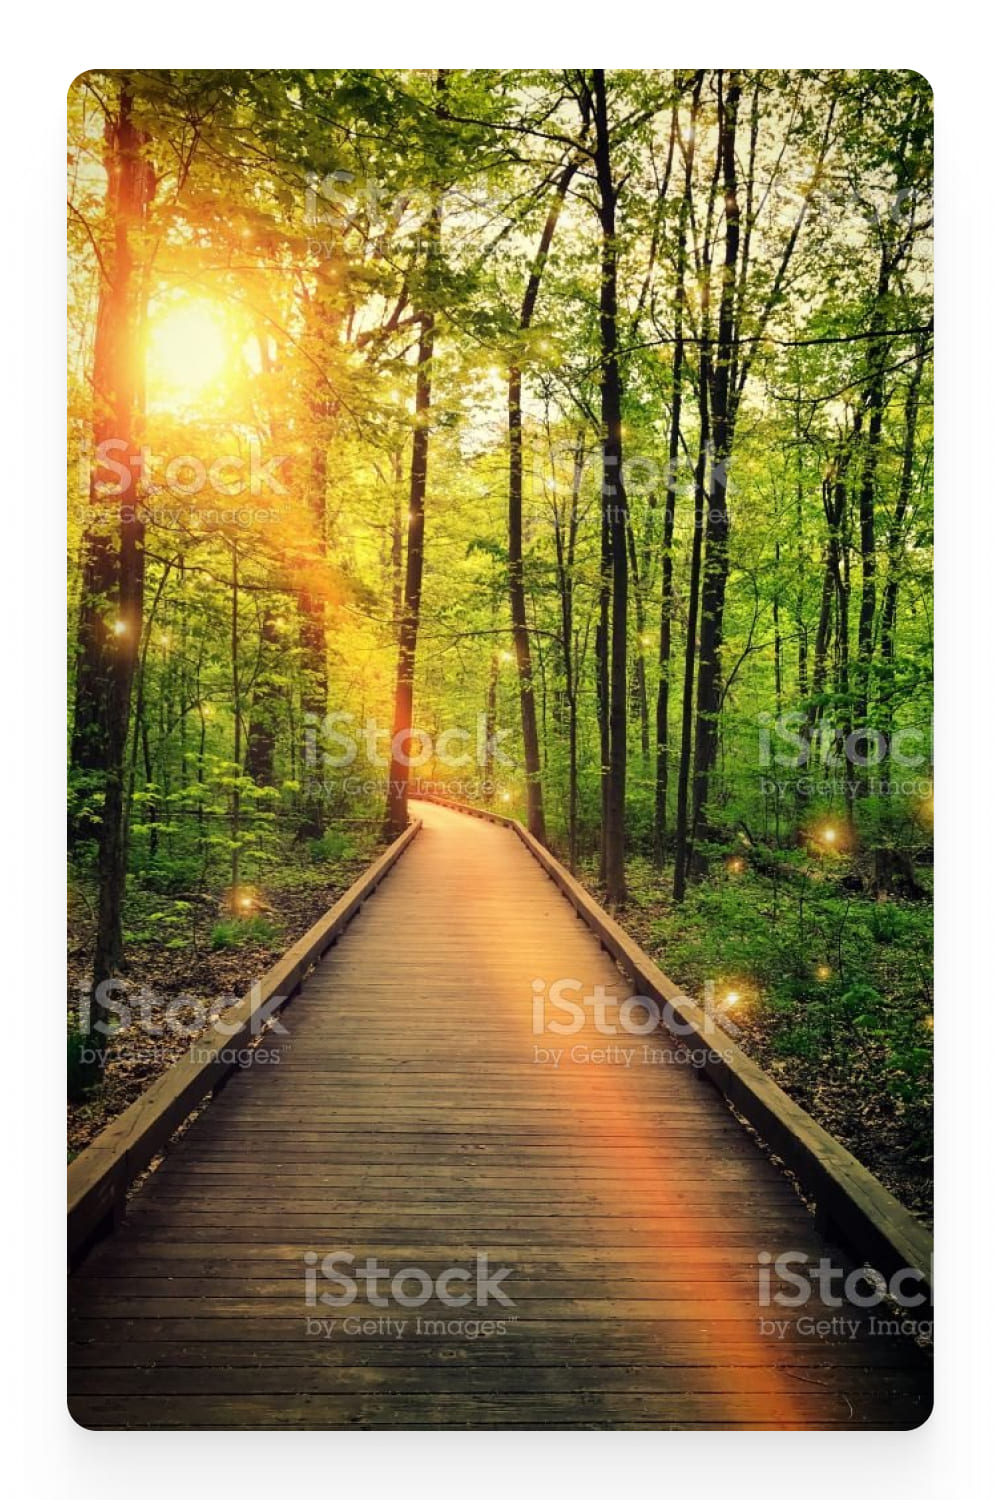 Photo of a wooden walkway in the forest.